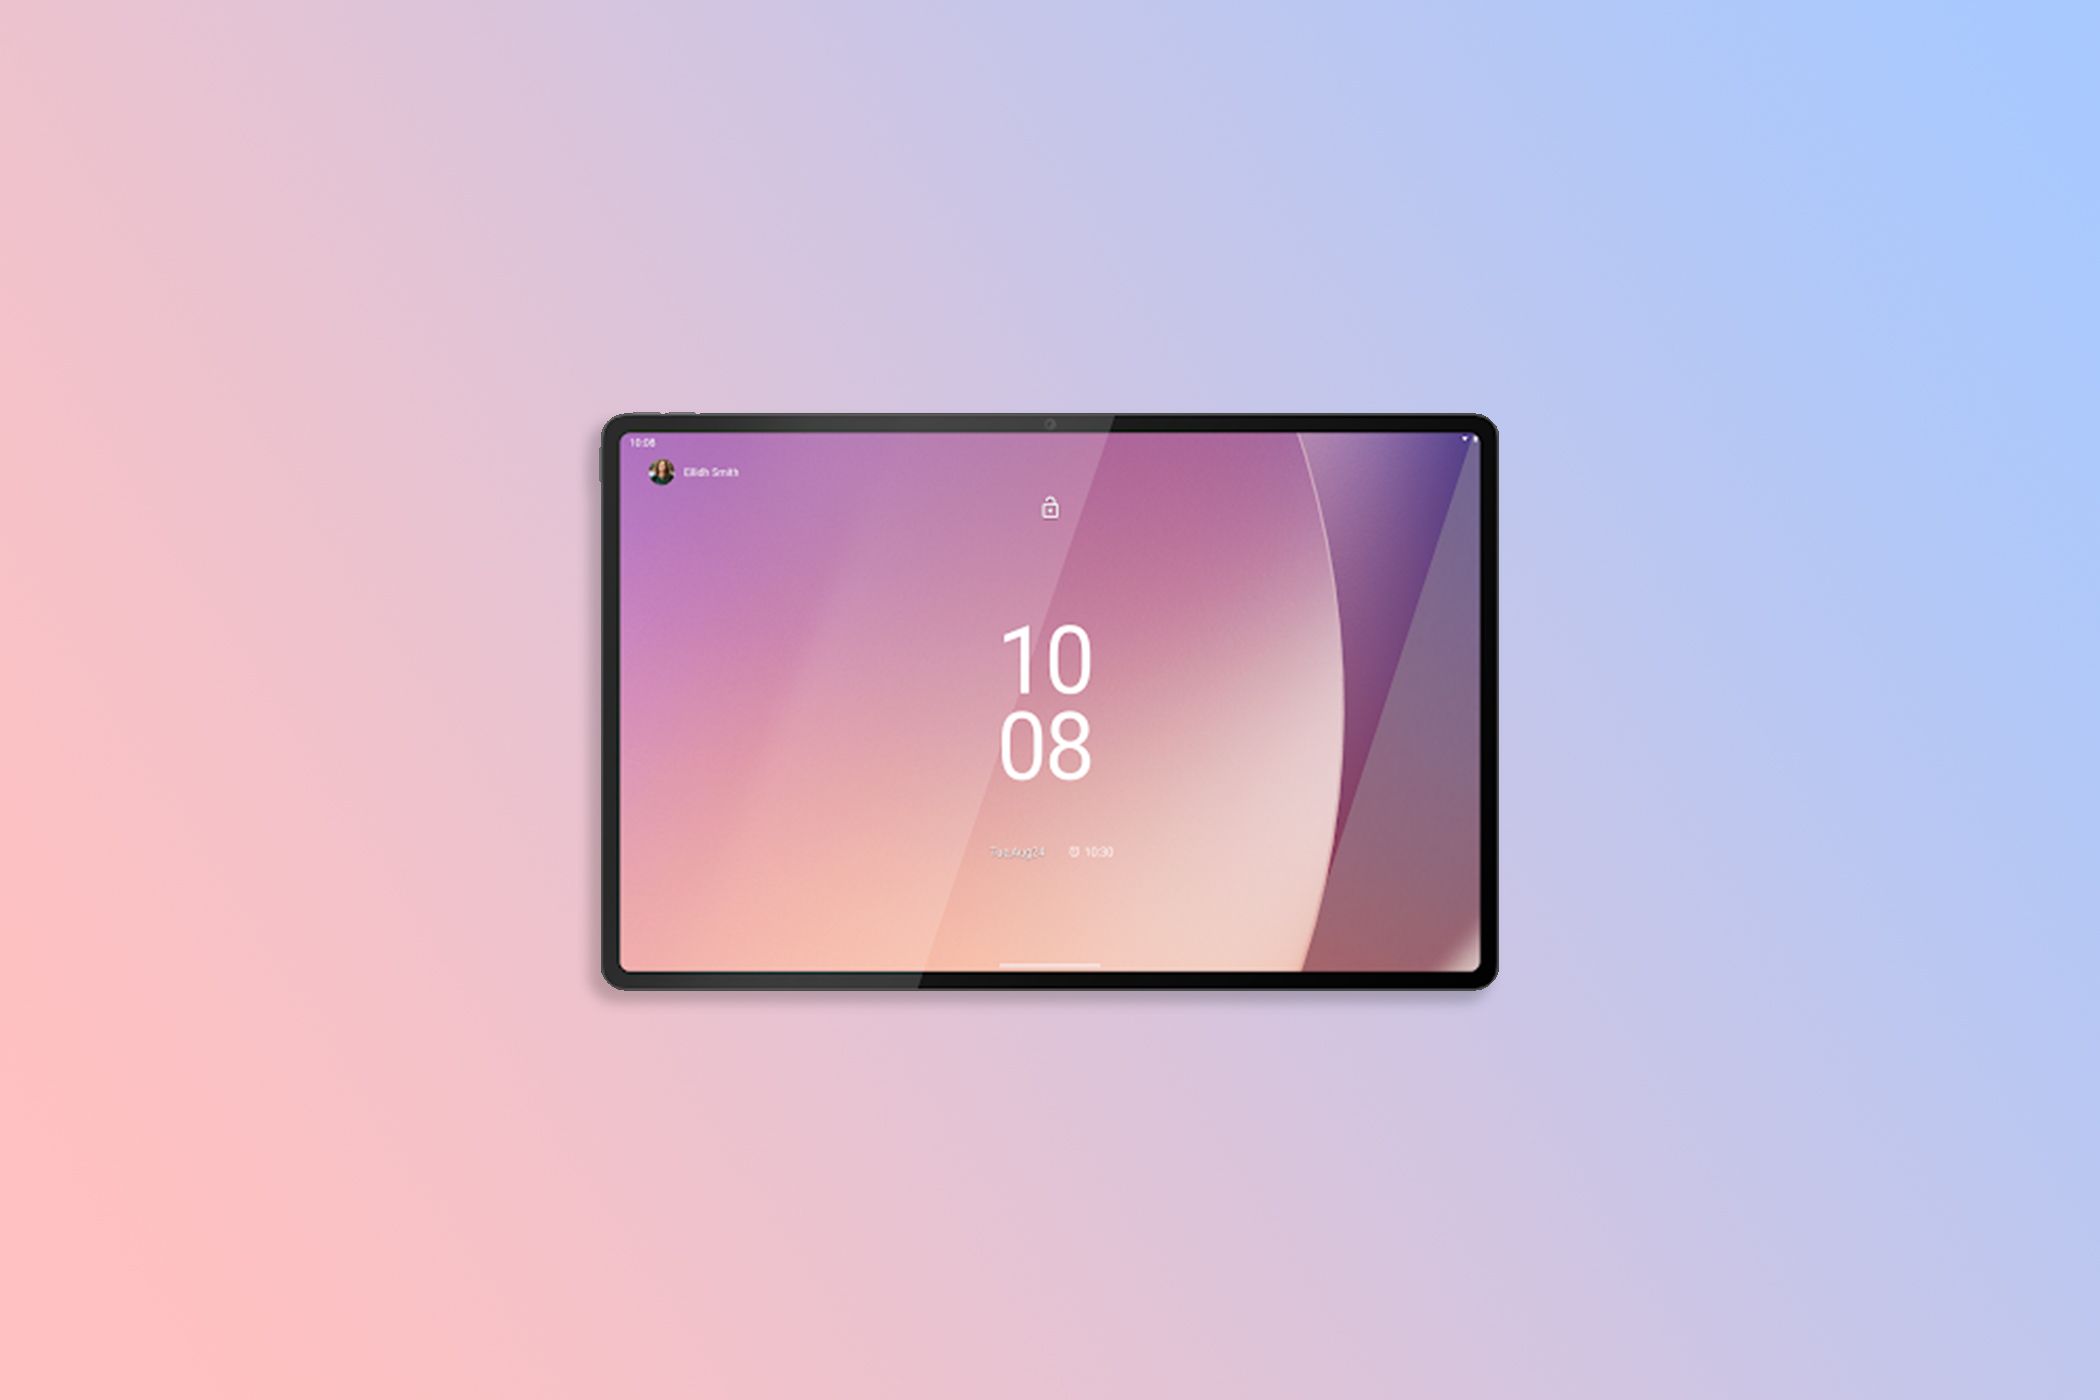 Lenovo Tab Extreme displayed on a gradient background.